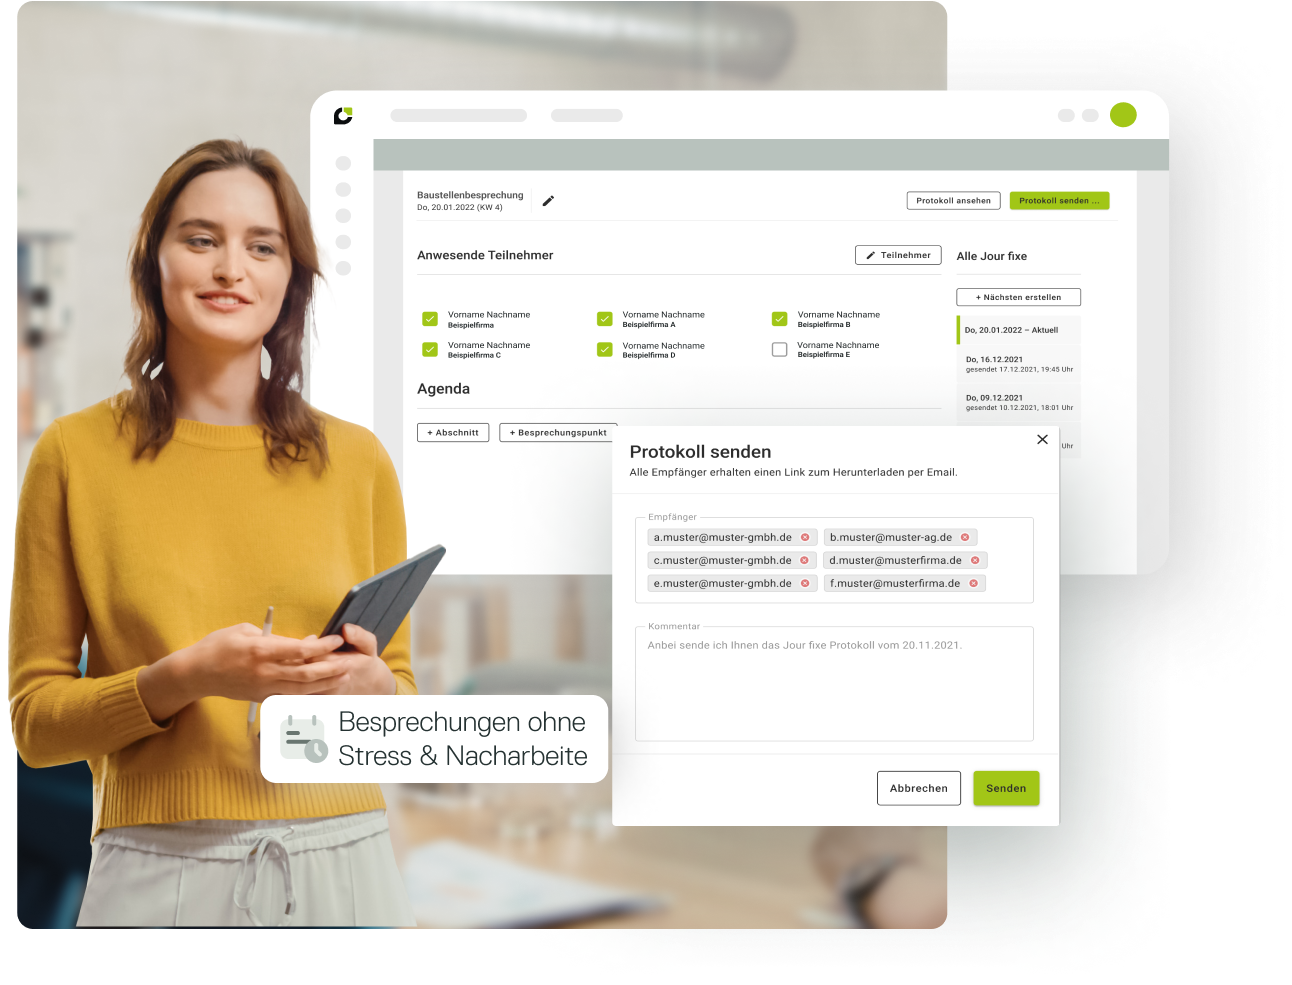 Effortless participant management, minutes at the click of a button and minimal organizational effort: with Capmo, the Jour fixe is done quickly and easily - without any stress or rework.